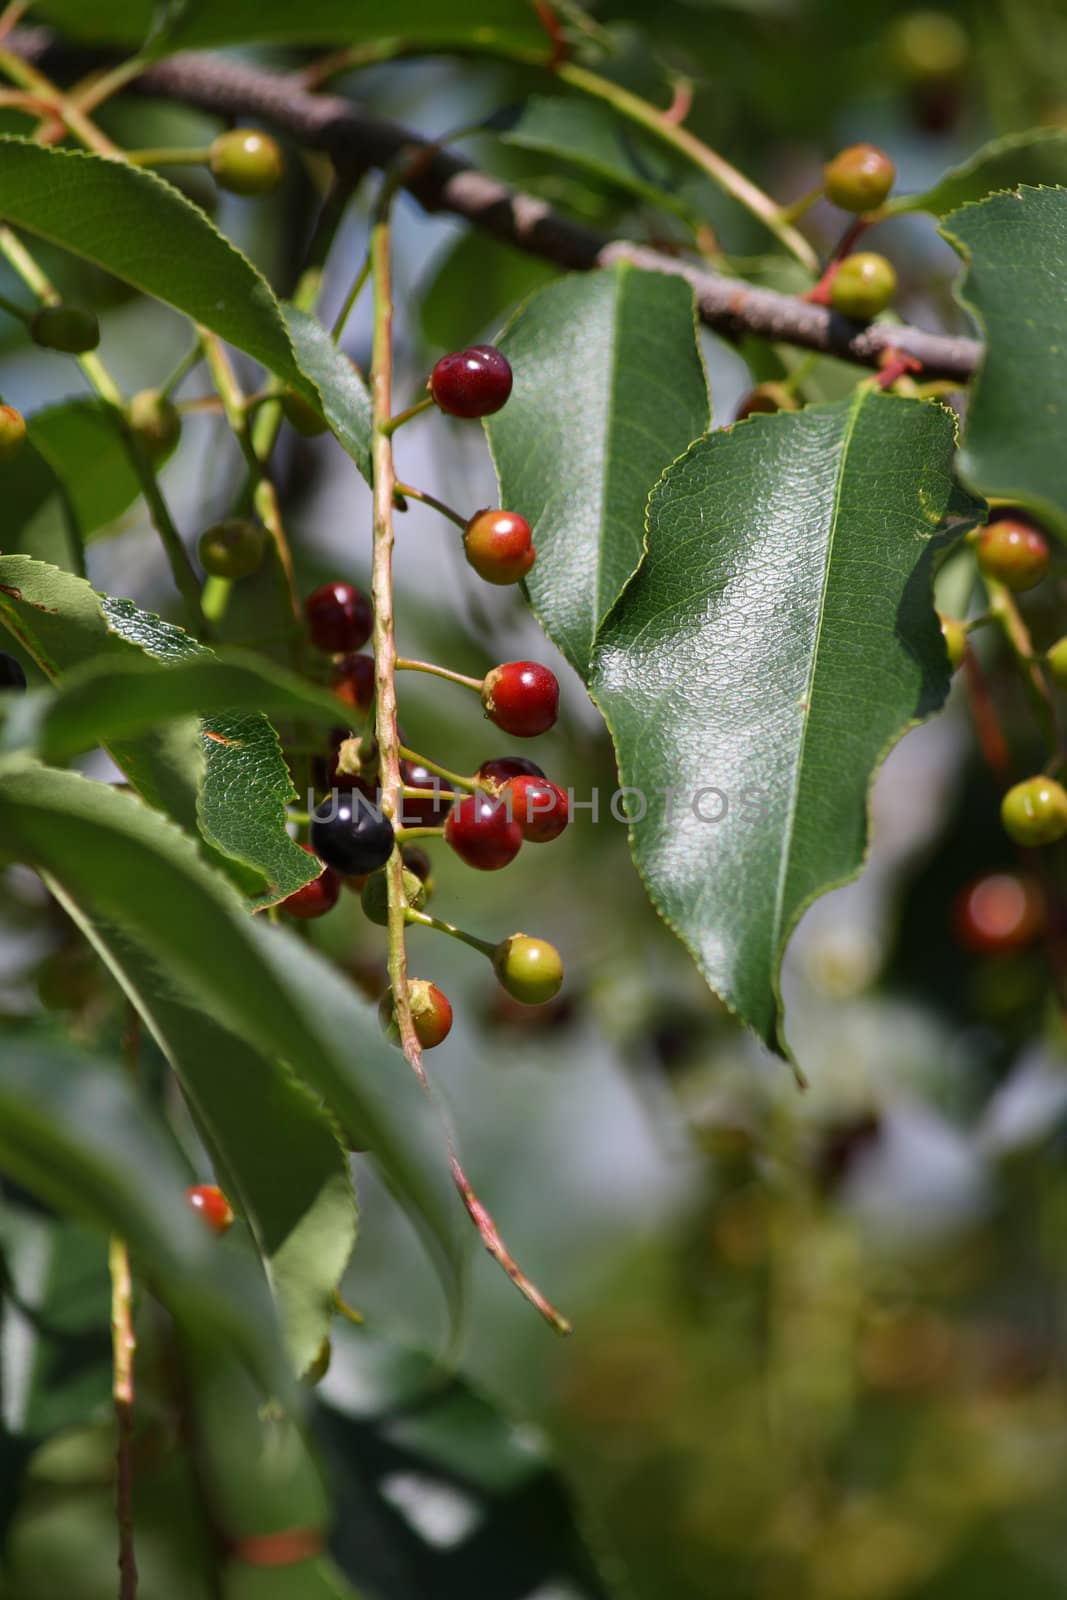 Close up of the berries and green leaves